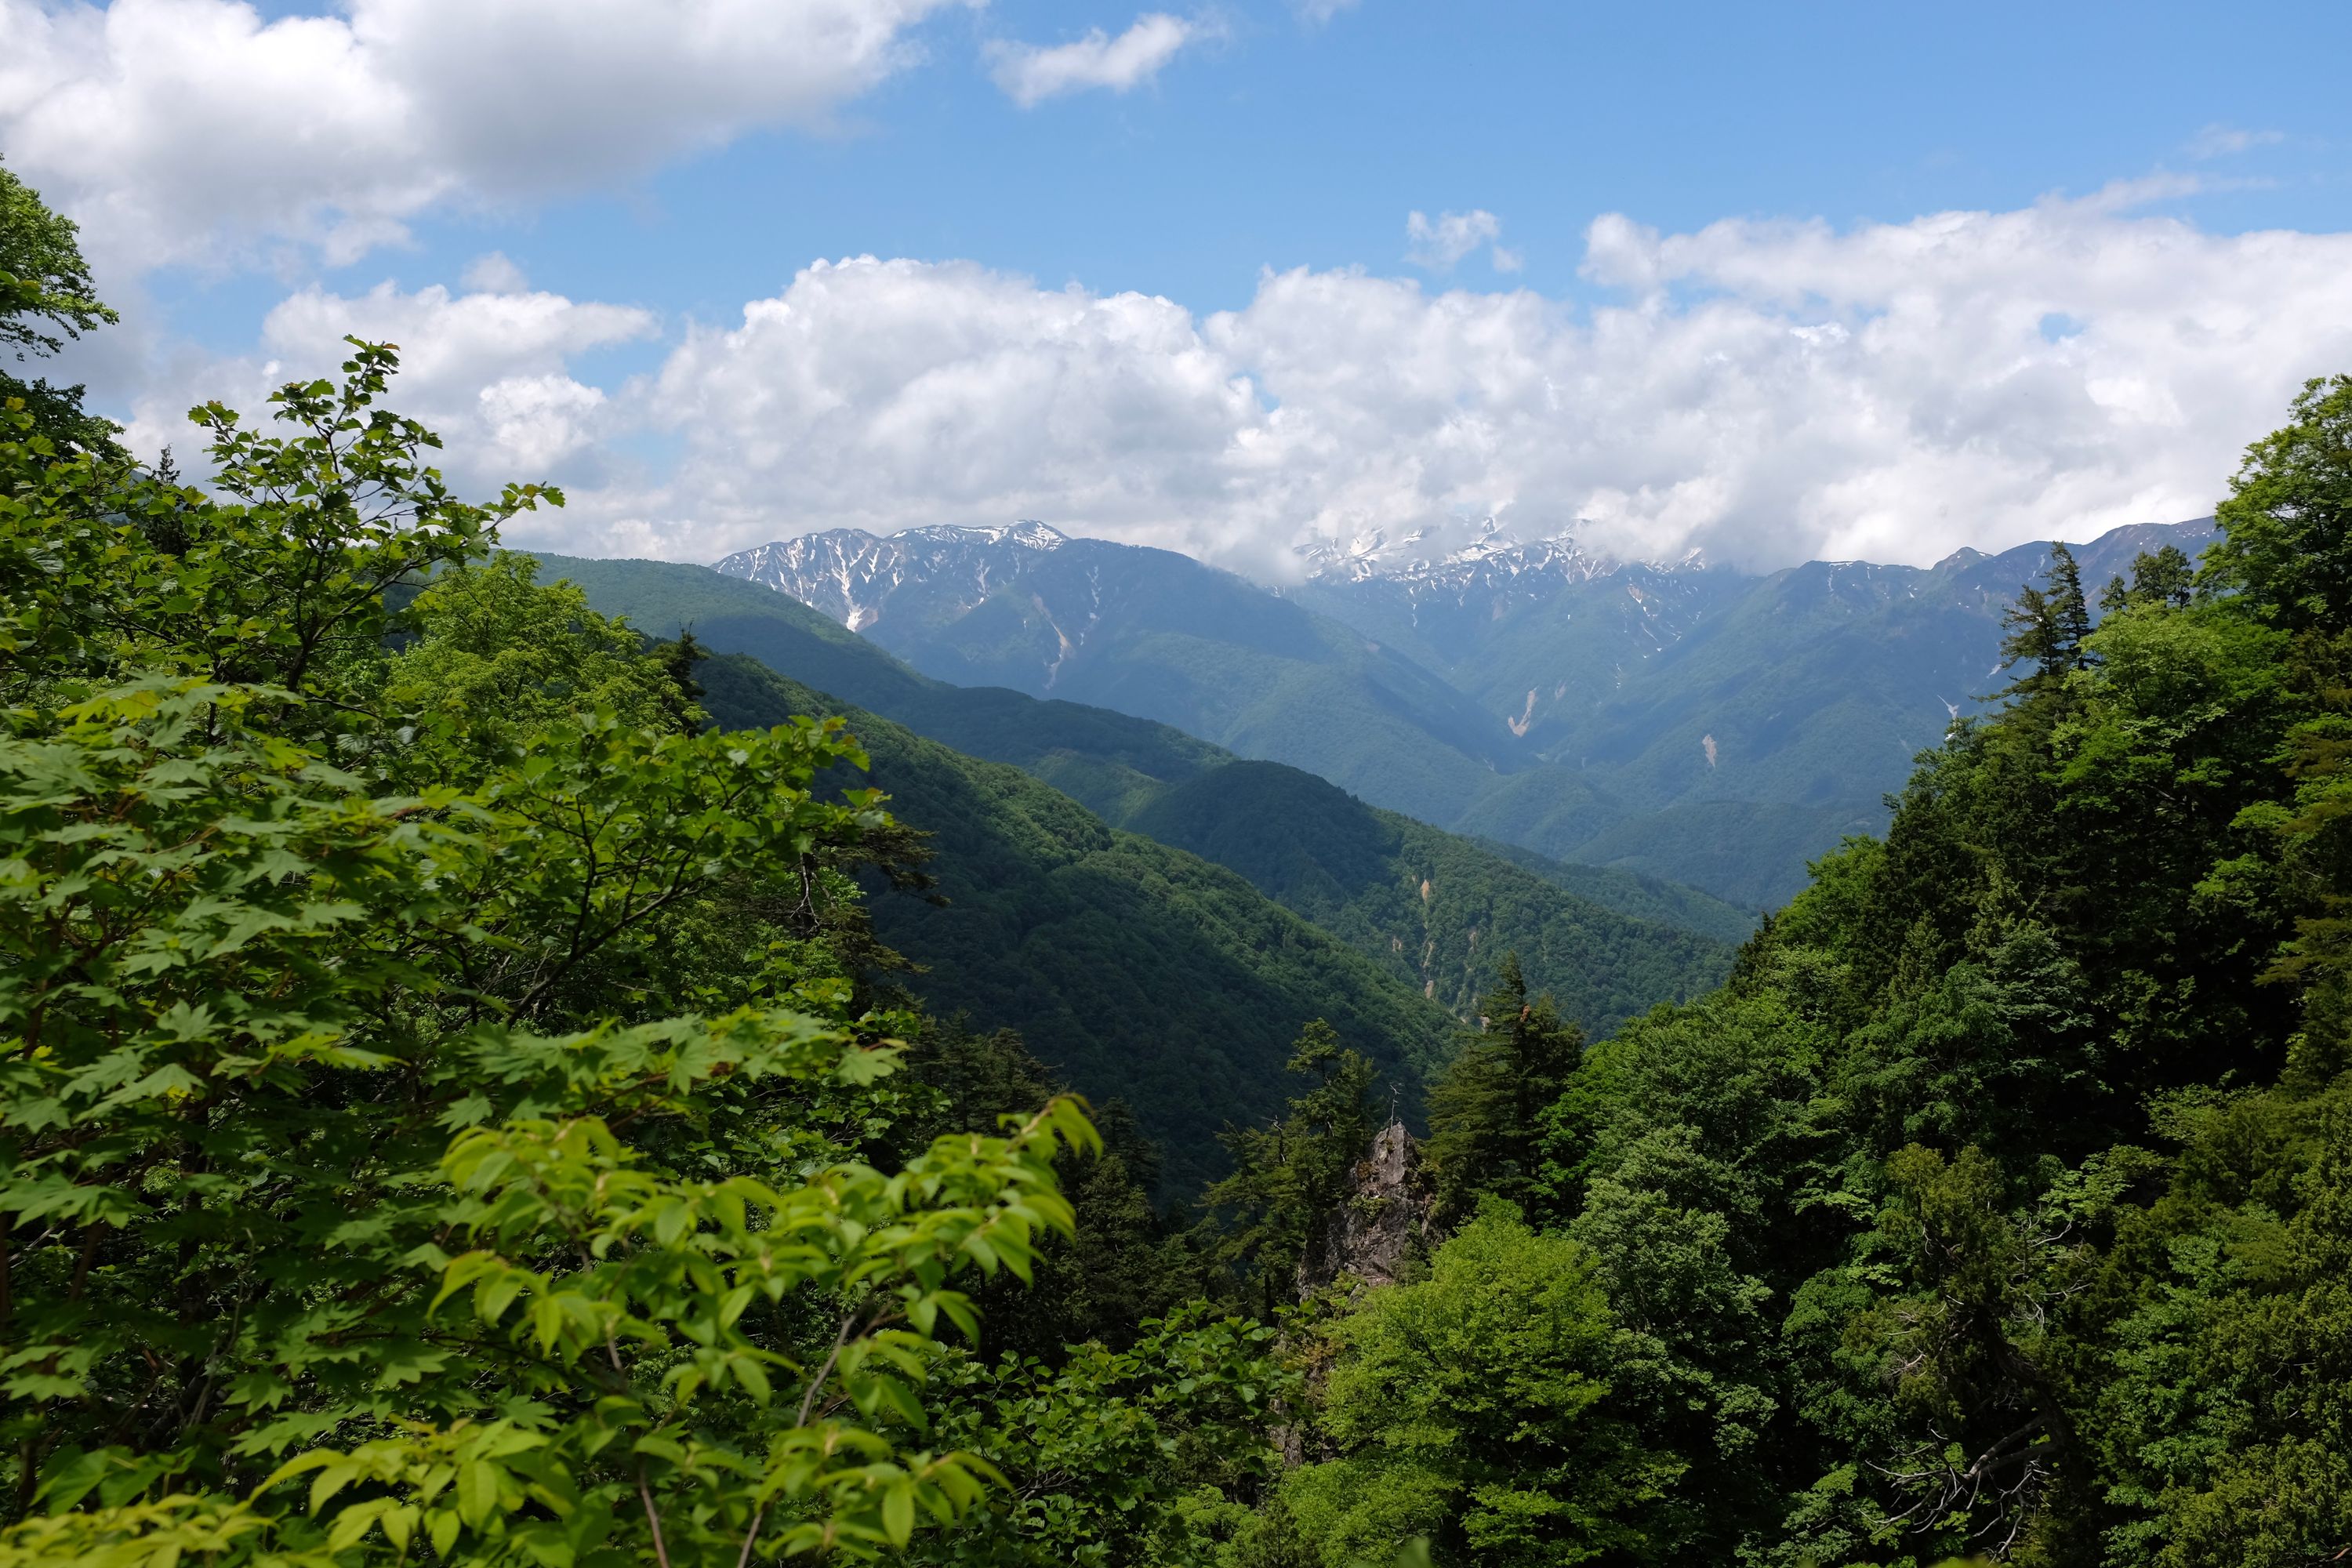 The snow peaks of Hakusan on the horizon, behind dense, forested hills.